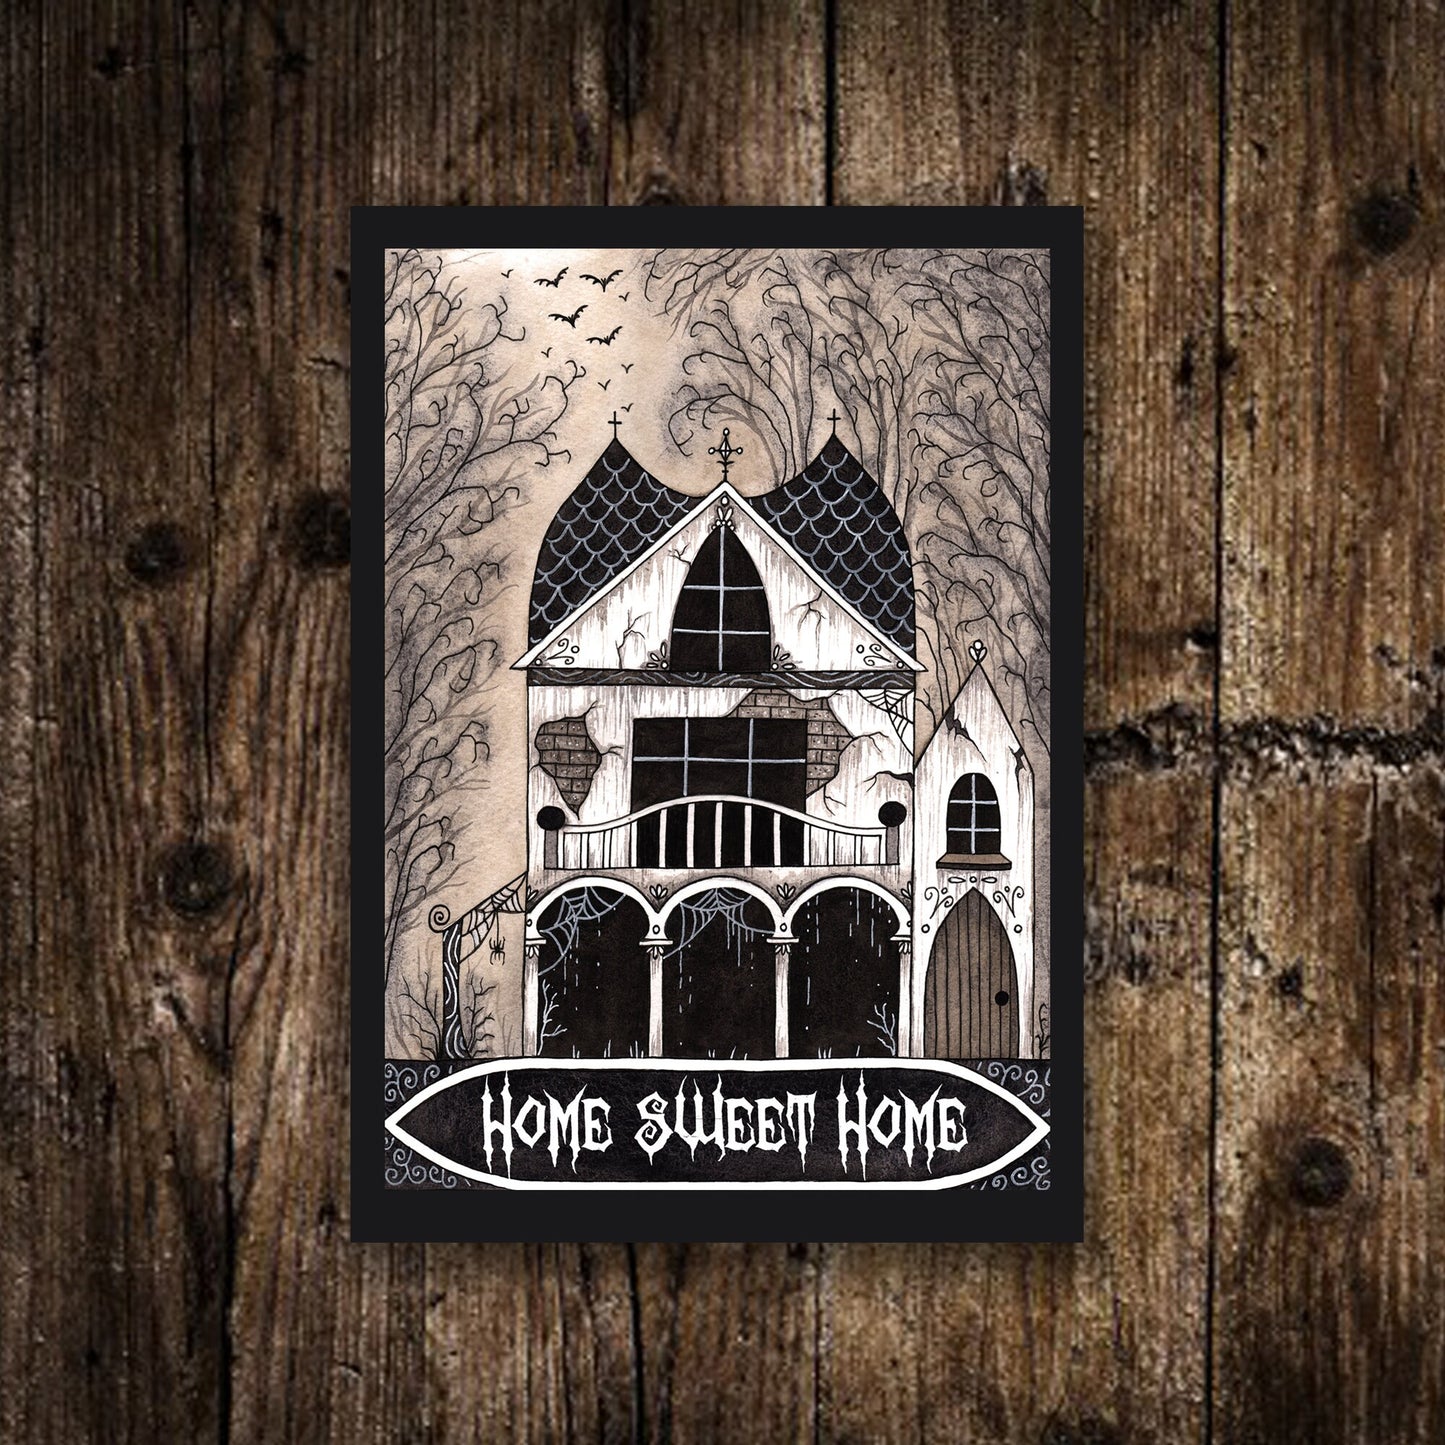 Mini A6 Haunted House Print - Small Gothic Home Sweet Home Illustration - Mini Goth Postcard Print - Halloween Witch House Bats Spooky Decor